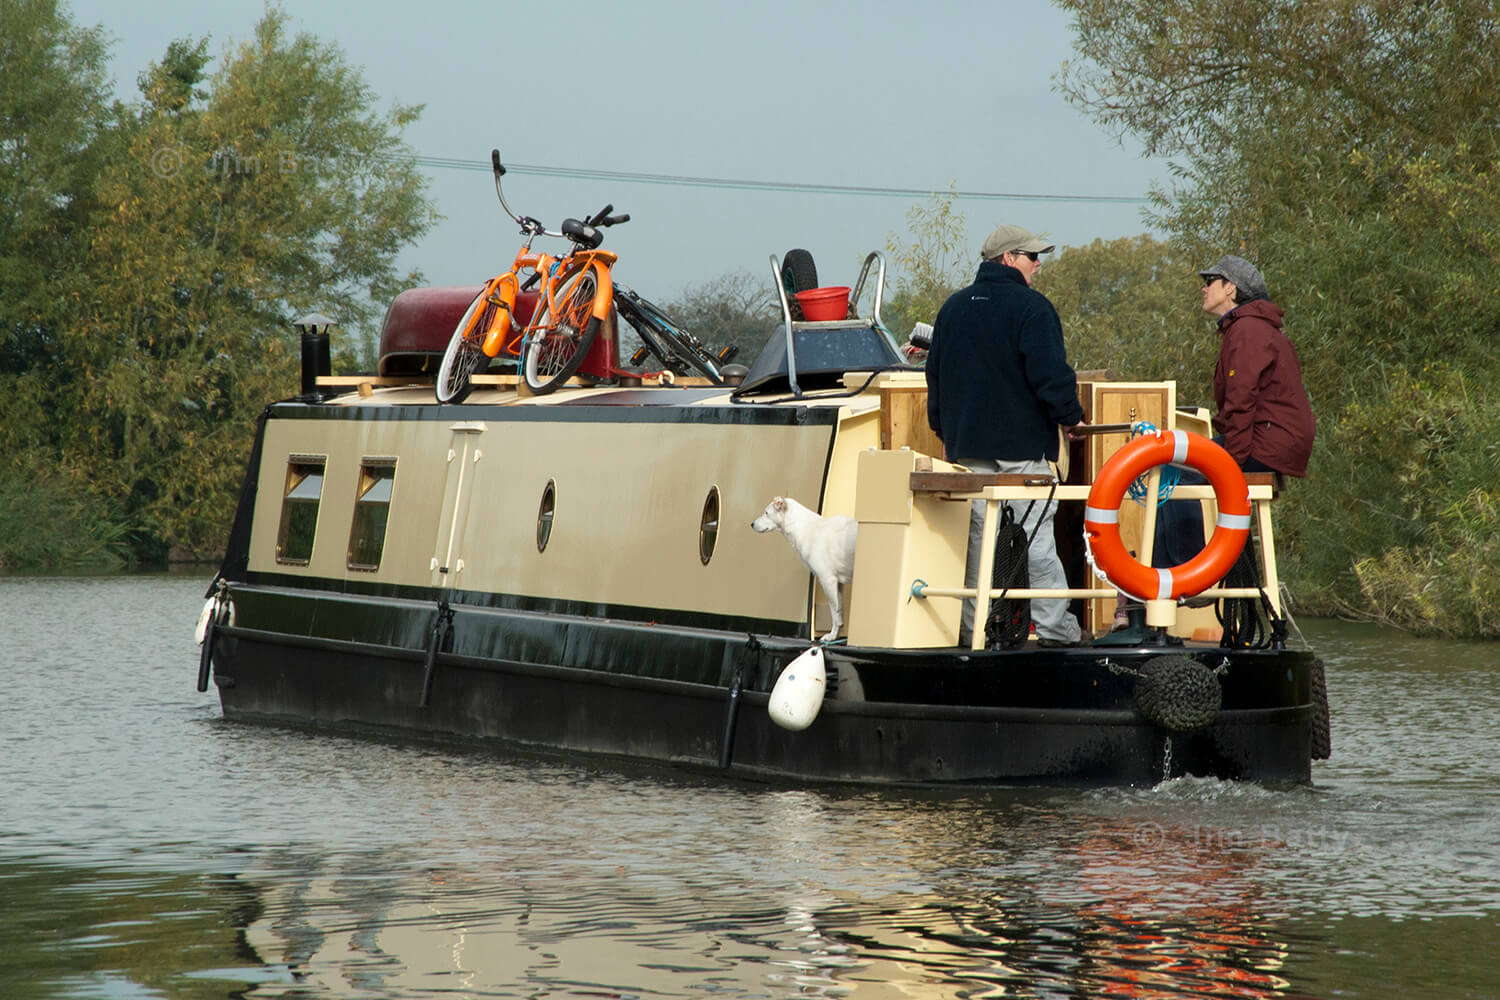 Two women and their dog cruising on the stern of their narrowboat